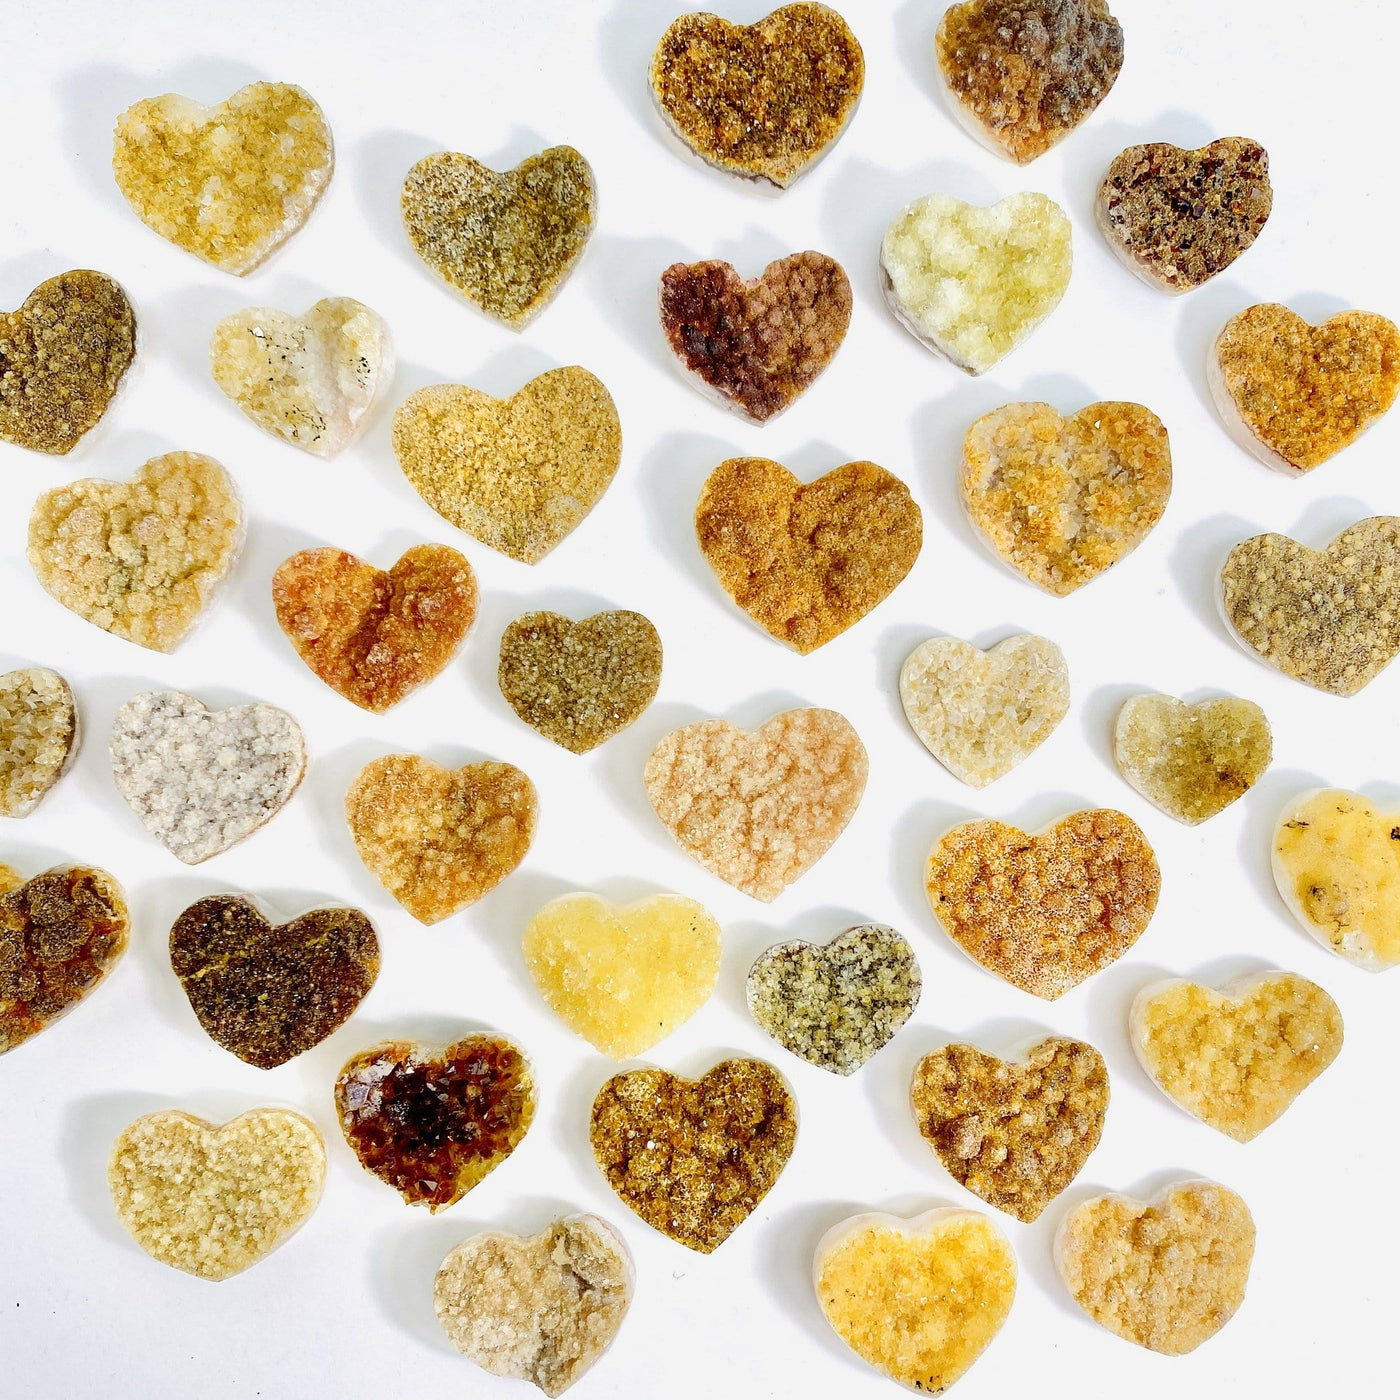 Citrine Cluster Druzy Hearts scattered across white background